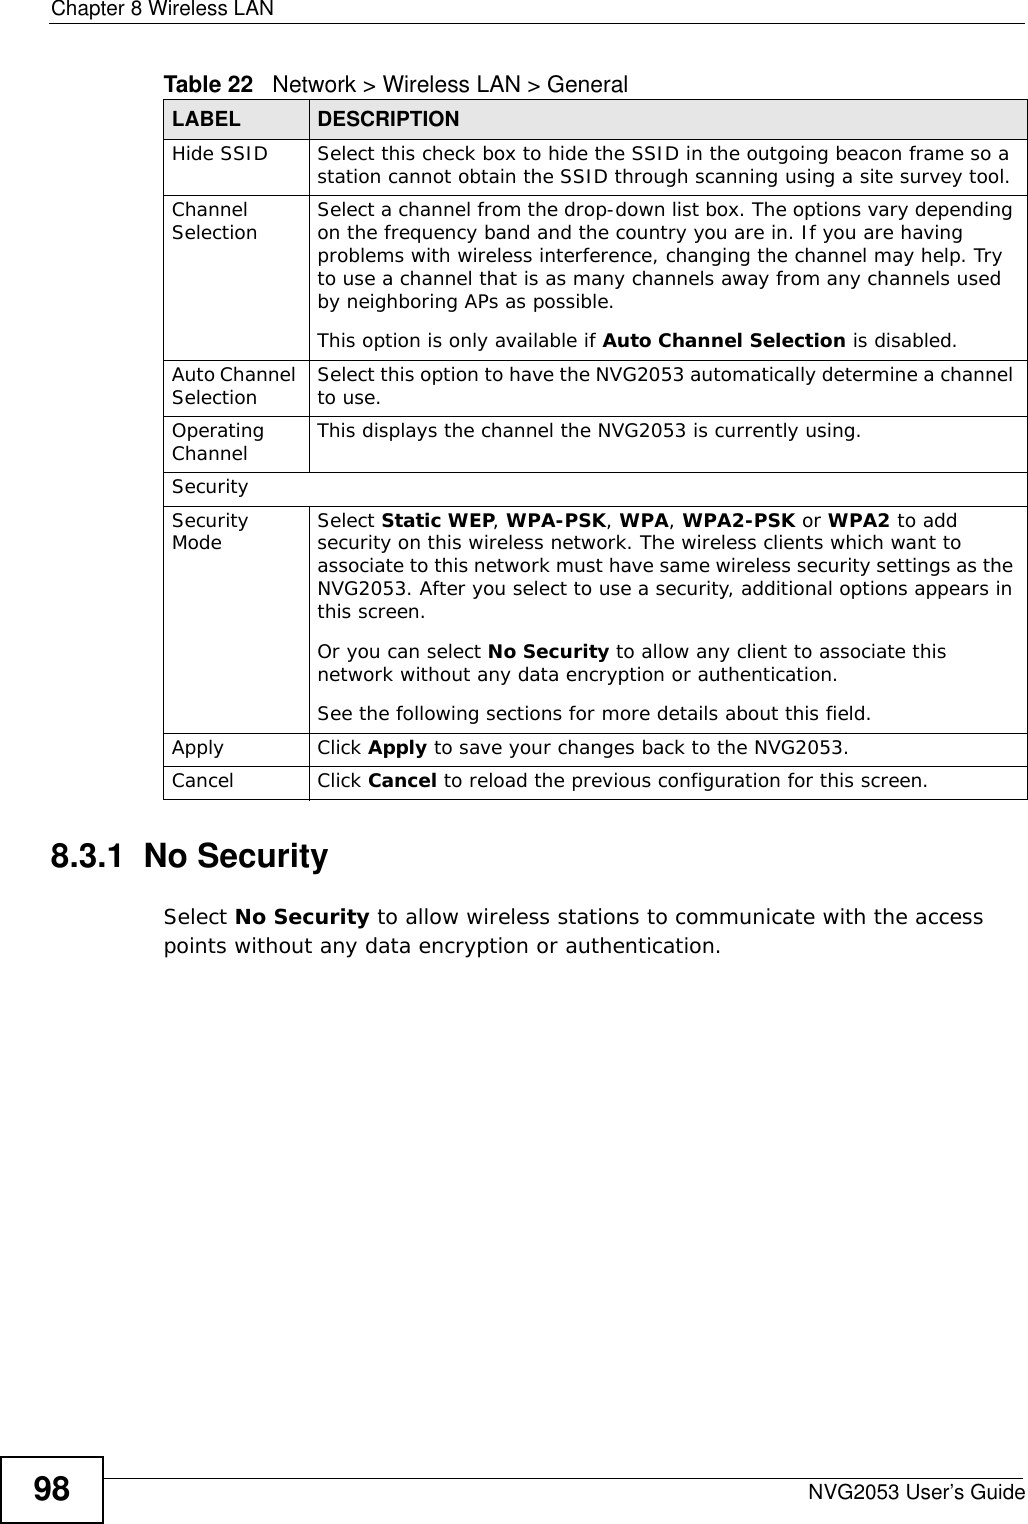 Chapter 8 Wireless LANNVG2053 User’s Guide988.3.1  No SecuritySelect No Security to allow wireless stations to communicate with the access points without any data encryption or authentication.Hide SSID Select this check box to hide the SSID in the outgoing beacon frame so a station cannot obtain the SSID through scanning using a site survey tool.Channel Selection Select a channel from the drop-down list box. The options vary depending on the frequency band and the country you are in. If you are having problems with wireless interference, changing the channel may help. Try to use a channel that is as many channels away from any channels used by neighboring APs as possible.This option is only available if Auto Channel Selection is disabled.Auto Channel Selection  Select this option to have the NVG2053 automatically determine a channel to use.Operating Channel  This displays the channel the NVG2053 is currently using.SecuritySecurity Mode Select Static WEP, WPA-PSK, WPA, WPA2-PSK or WPA2 to add security on this wireless network. The wireless clients which want to associate to this network must have same wireless security settings as the NVG2053. After you select to use a security, additional options appears in this screen.  Or you can select No Security to allow any client to associate this network without any data encryption or authentication.See the following sections for more details about this field.Apply Click Apply to save your changes back to the NVG2053.Cancel Click Cancel to reload the previous configuration for this screen.Table 22   Network &gt; Wireless LAN &gt; GeneralLABEL DESCRIPTION